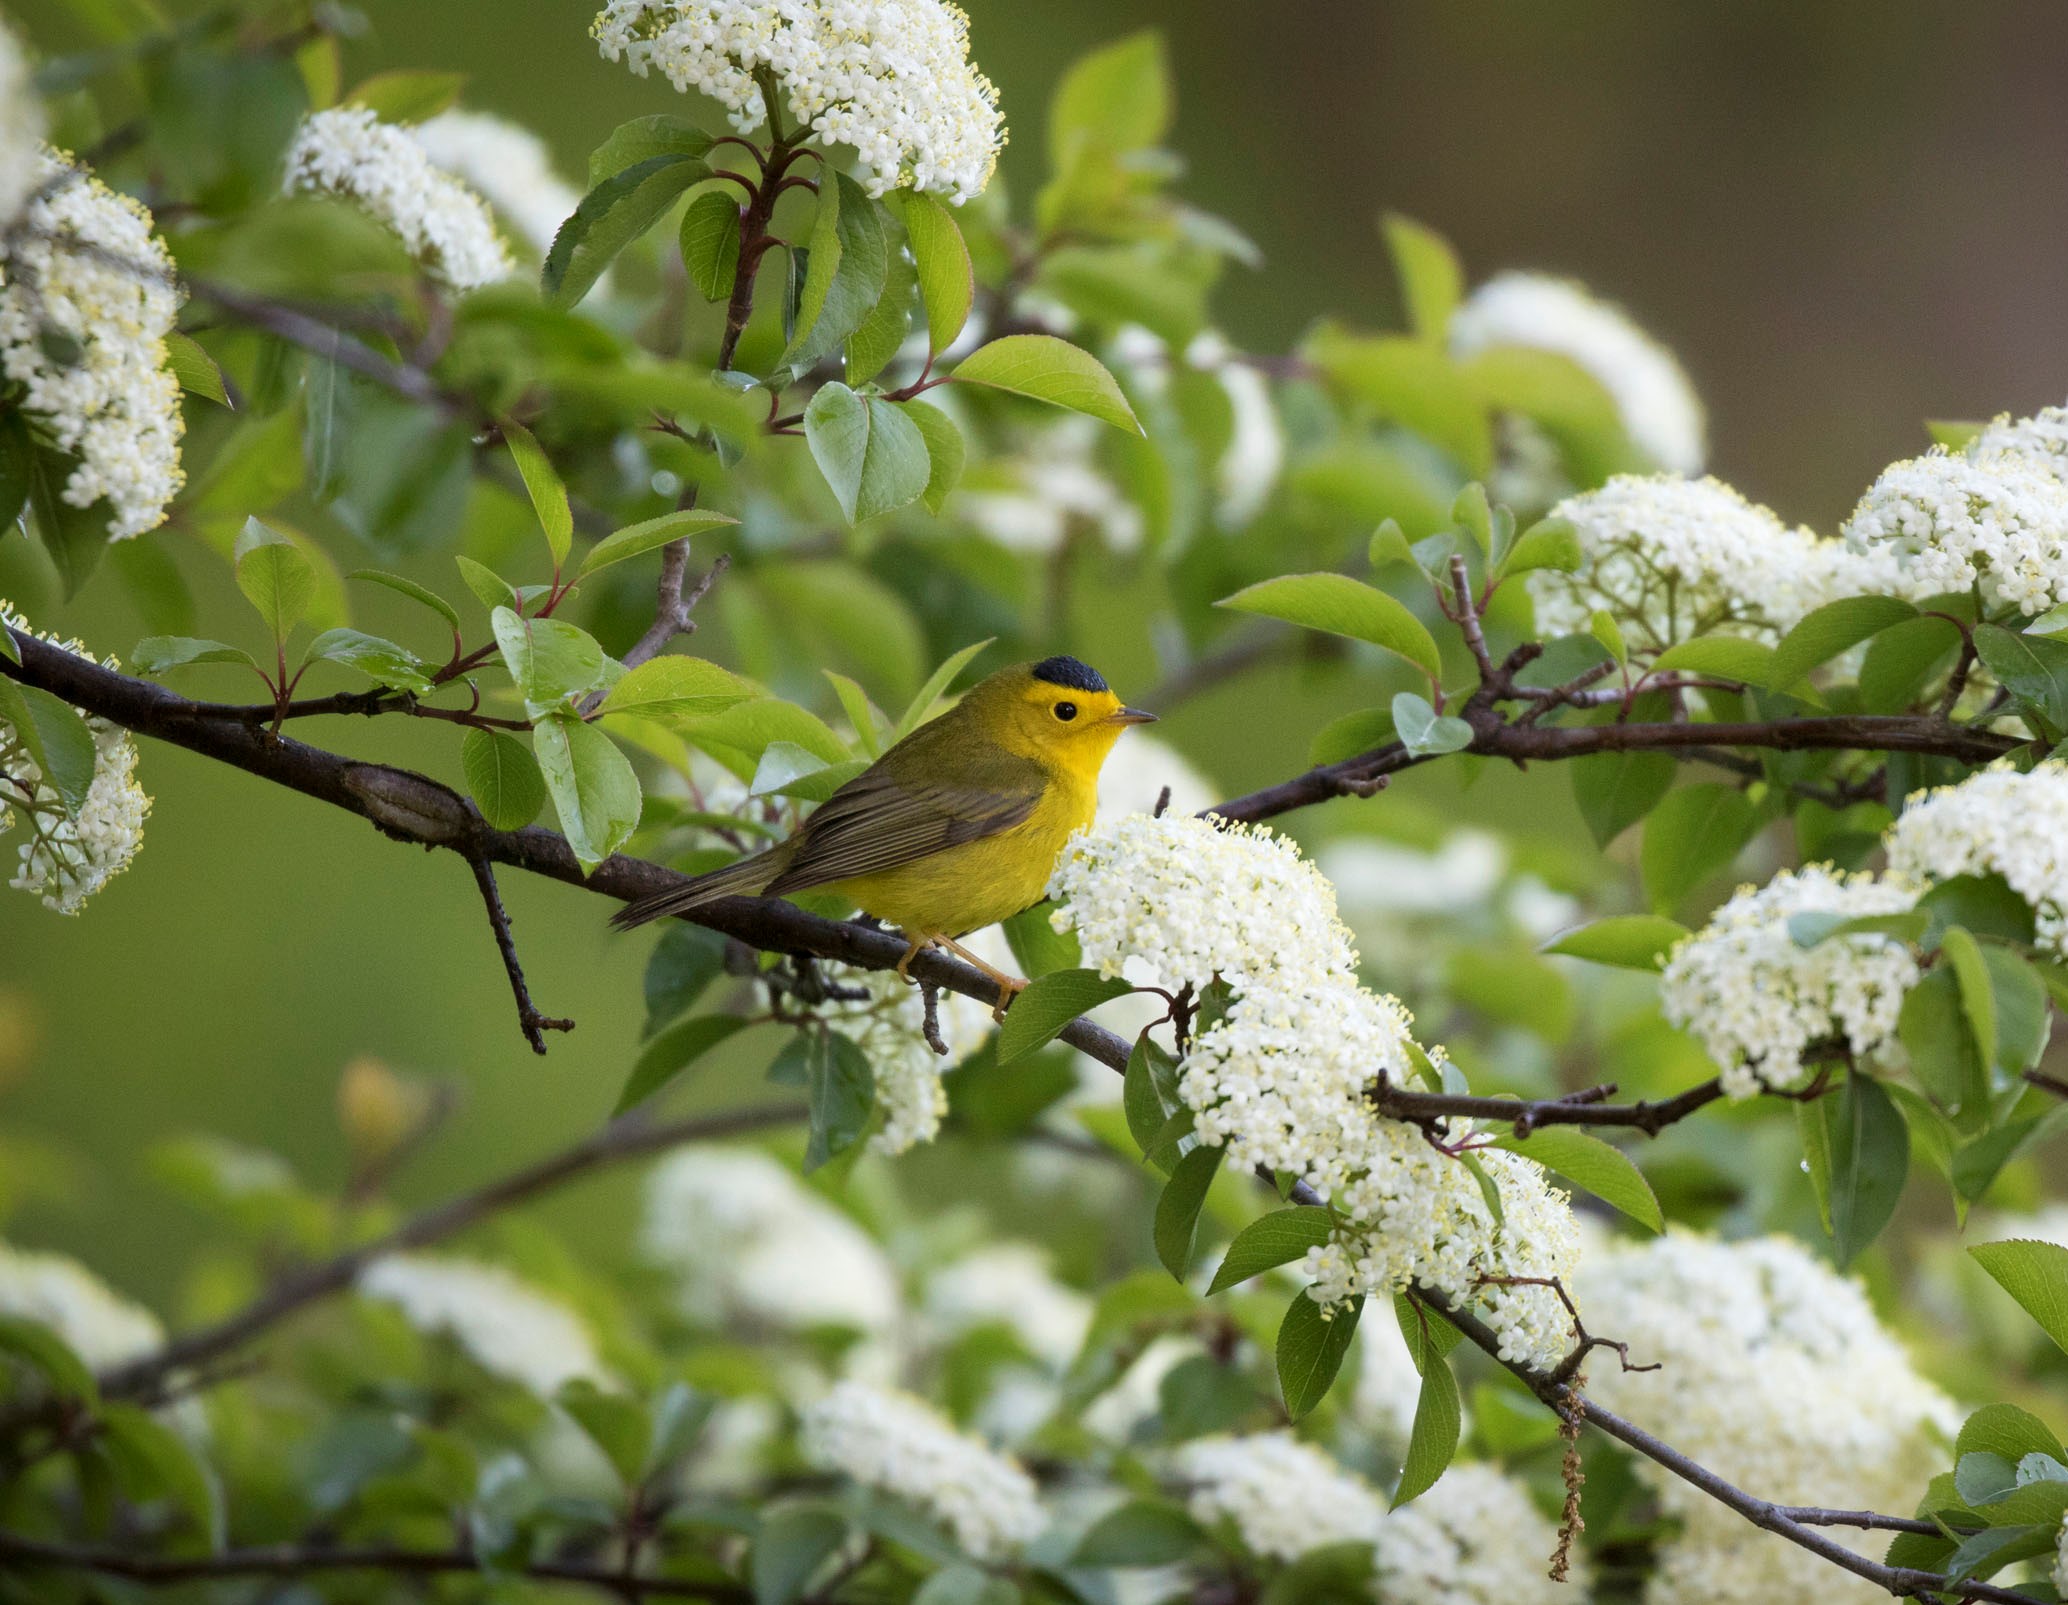 The Wilson`s Warbler (here, a male with his distinct black cap) is among the many species of songbird that stops by the gardens of Wave Hill each spring and fall. Photo: François Portmann